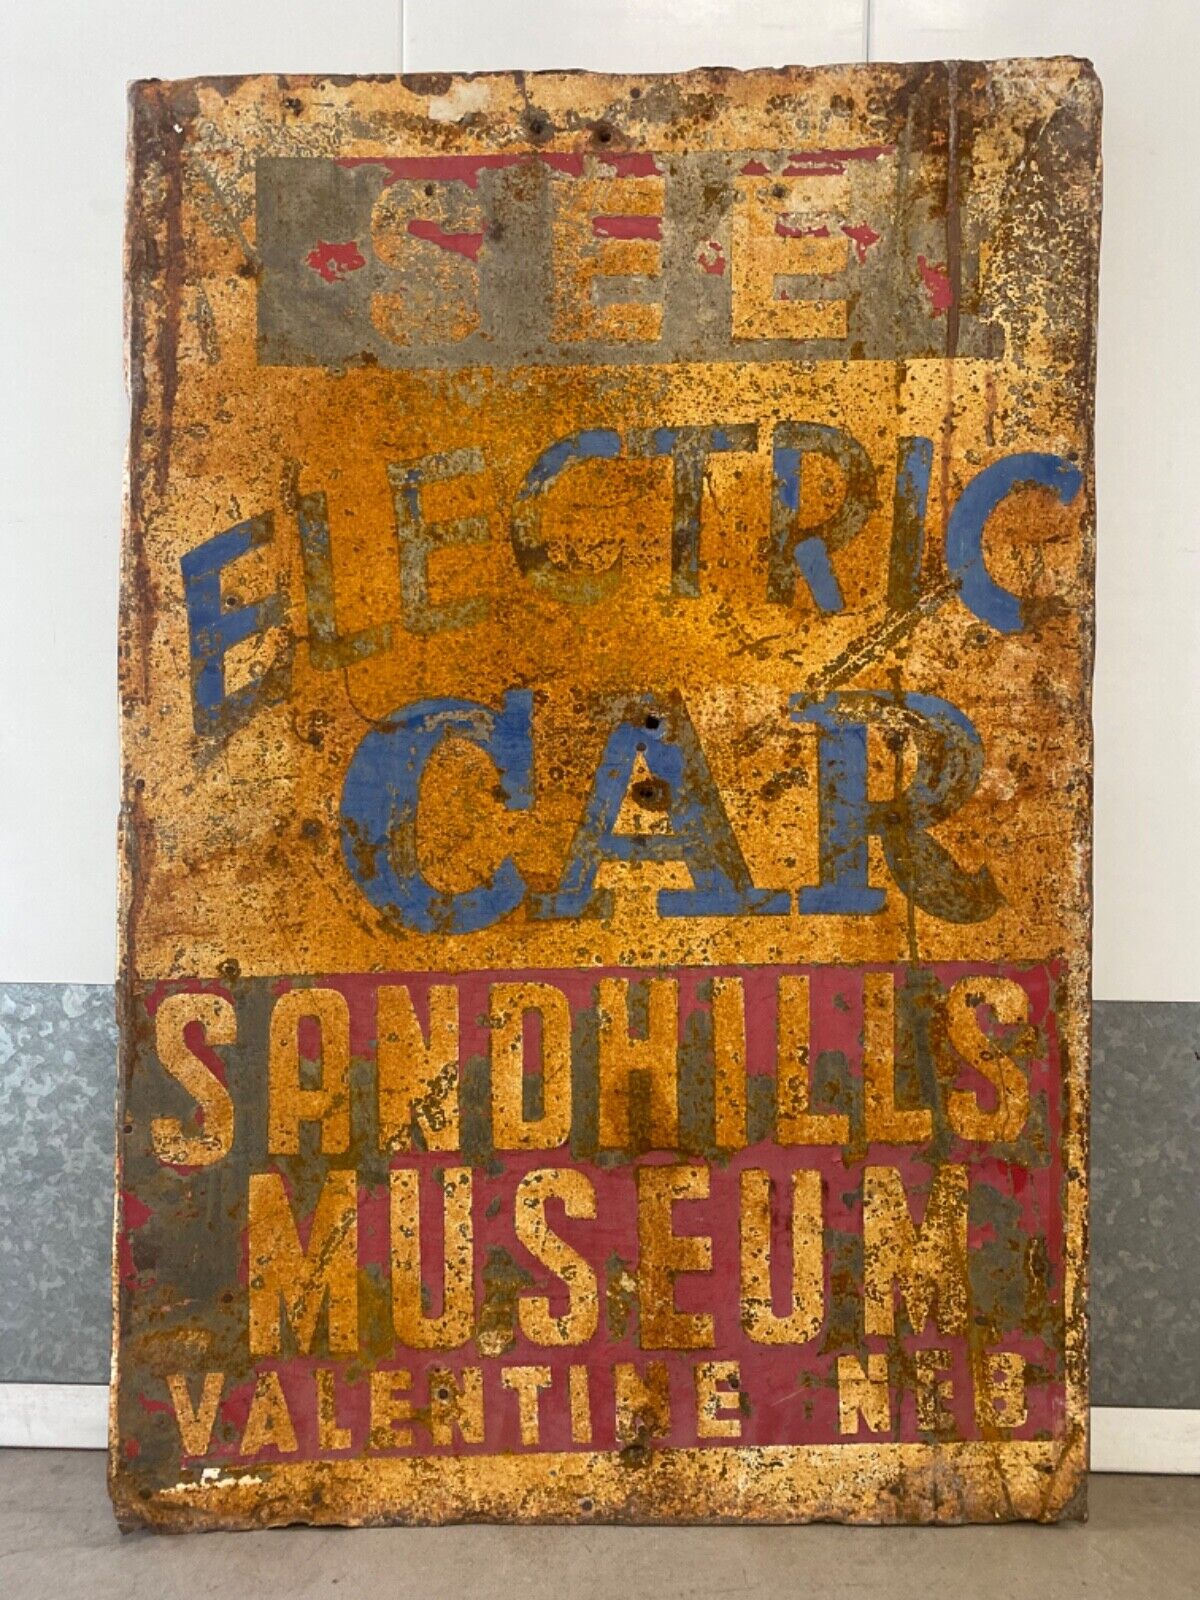 🔥 Unusual Antique Old ELECTRIC CAR Automobile Museum Painted Sign, 1930s